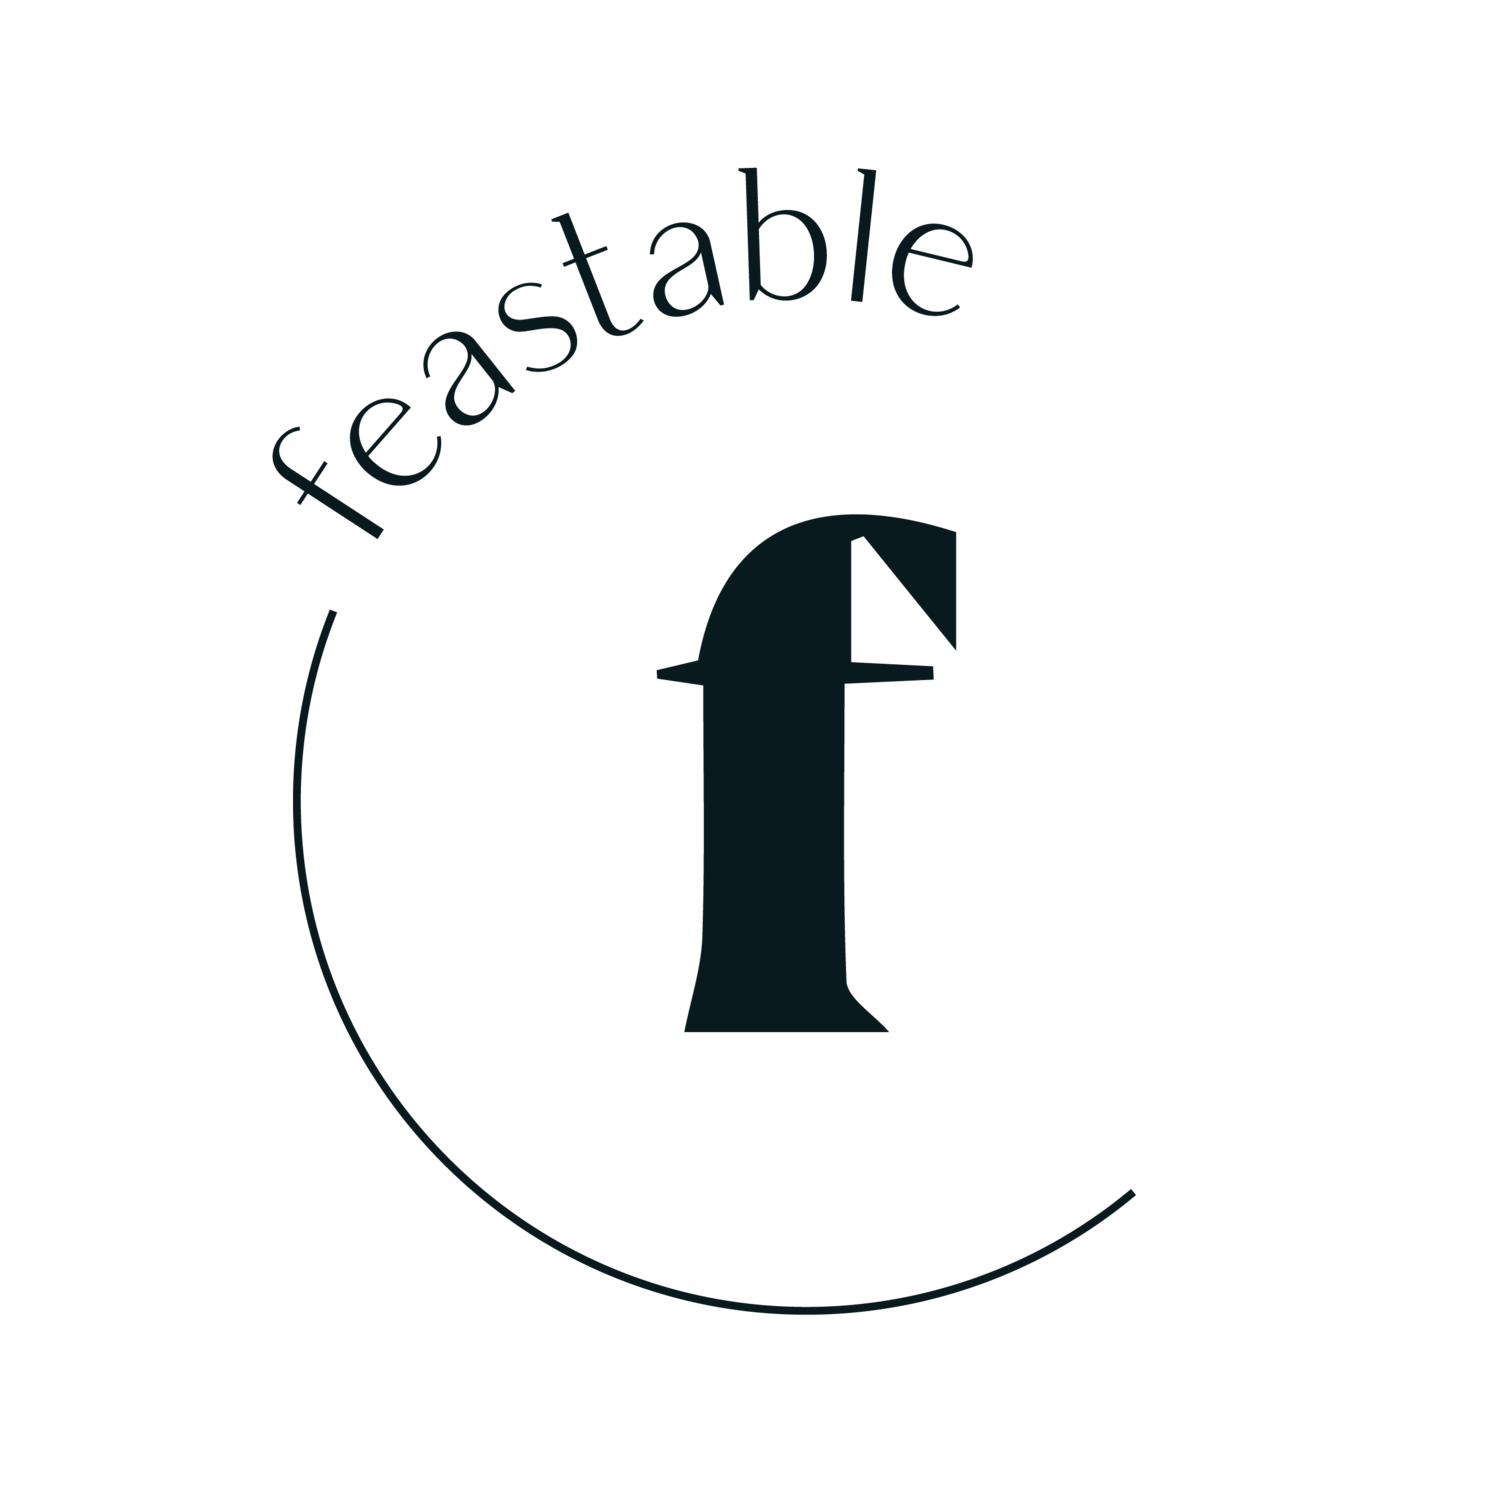 ABOUT/CONTACT — Feastable